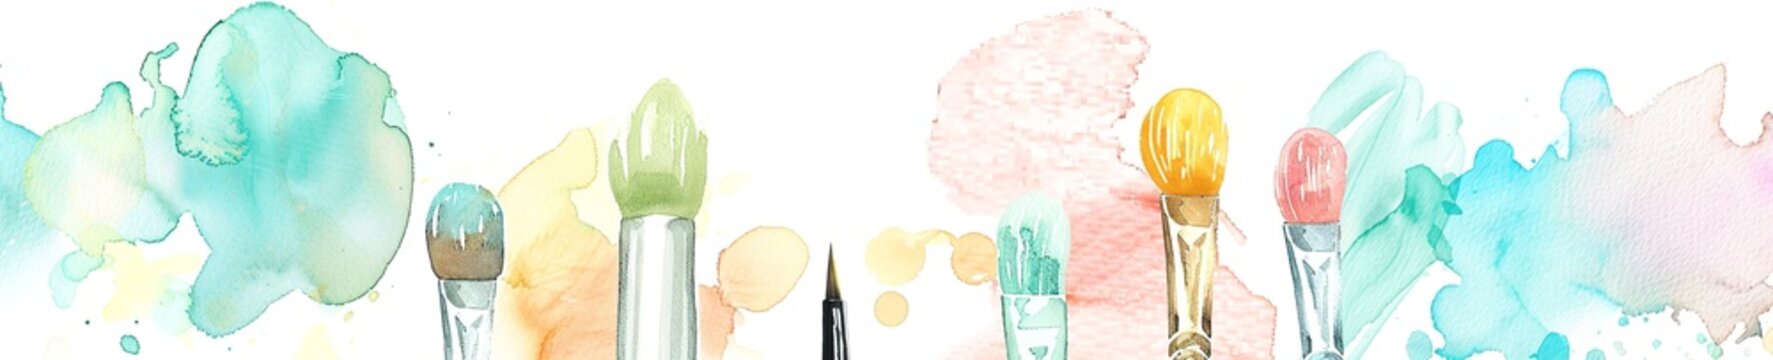 minimal watercolor banner with creative tools